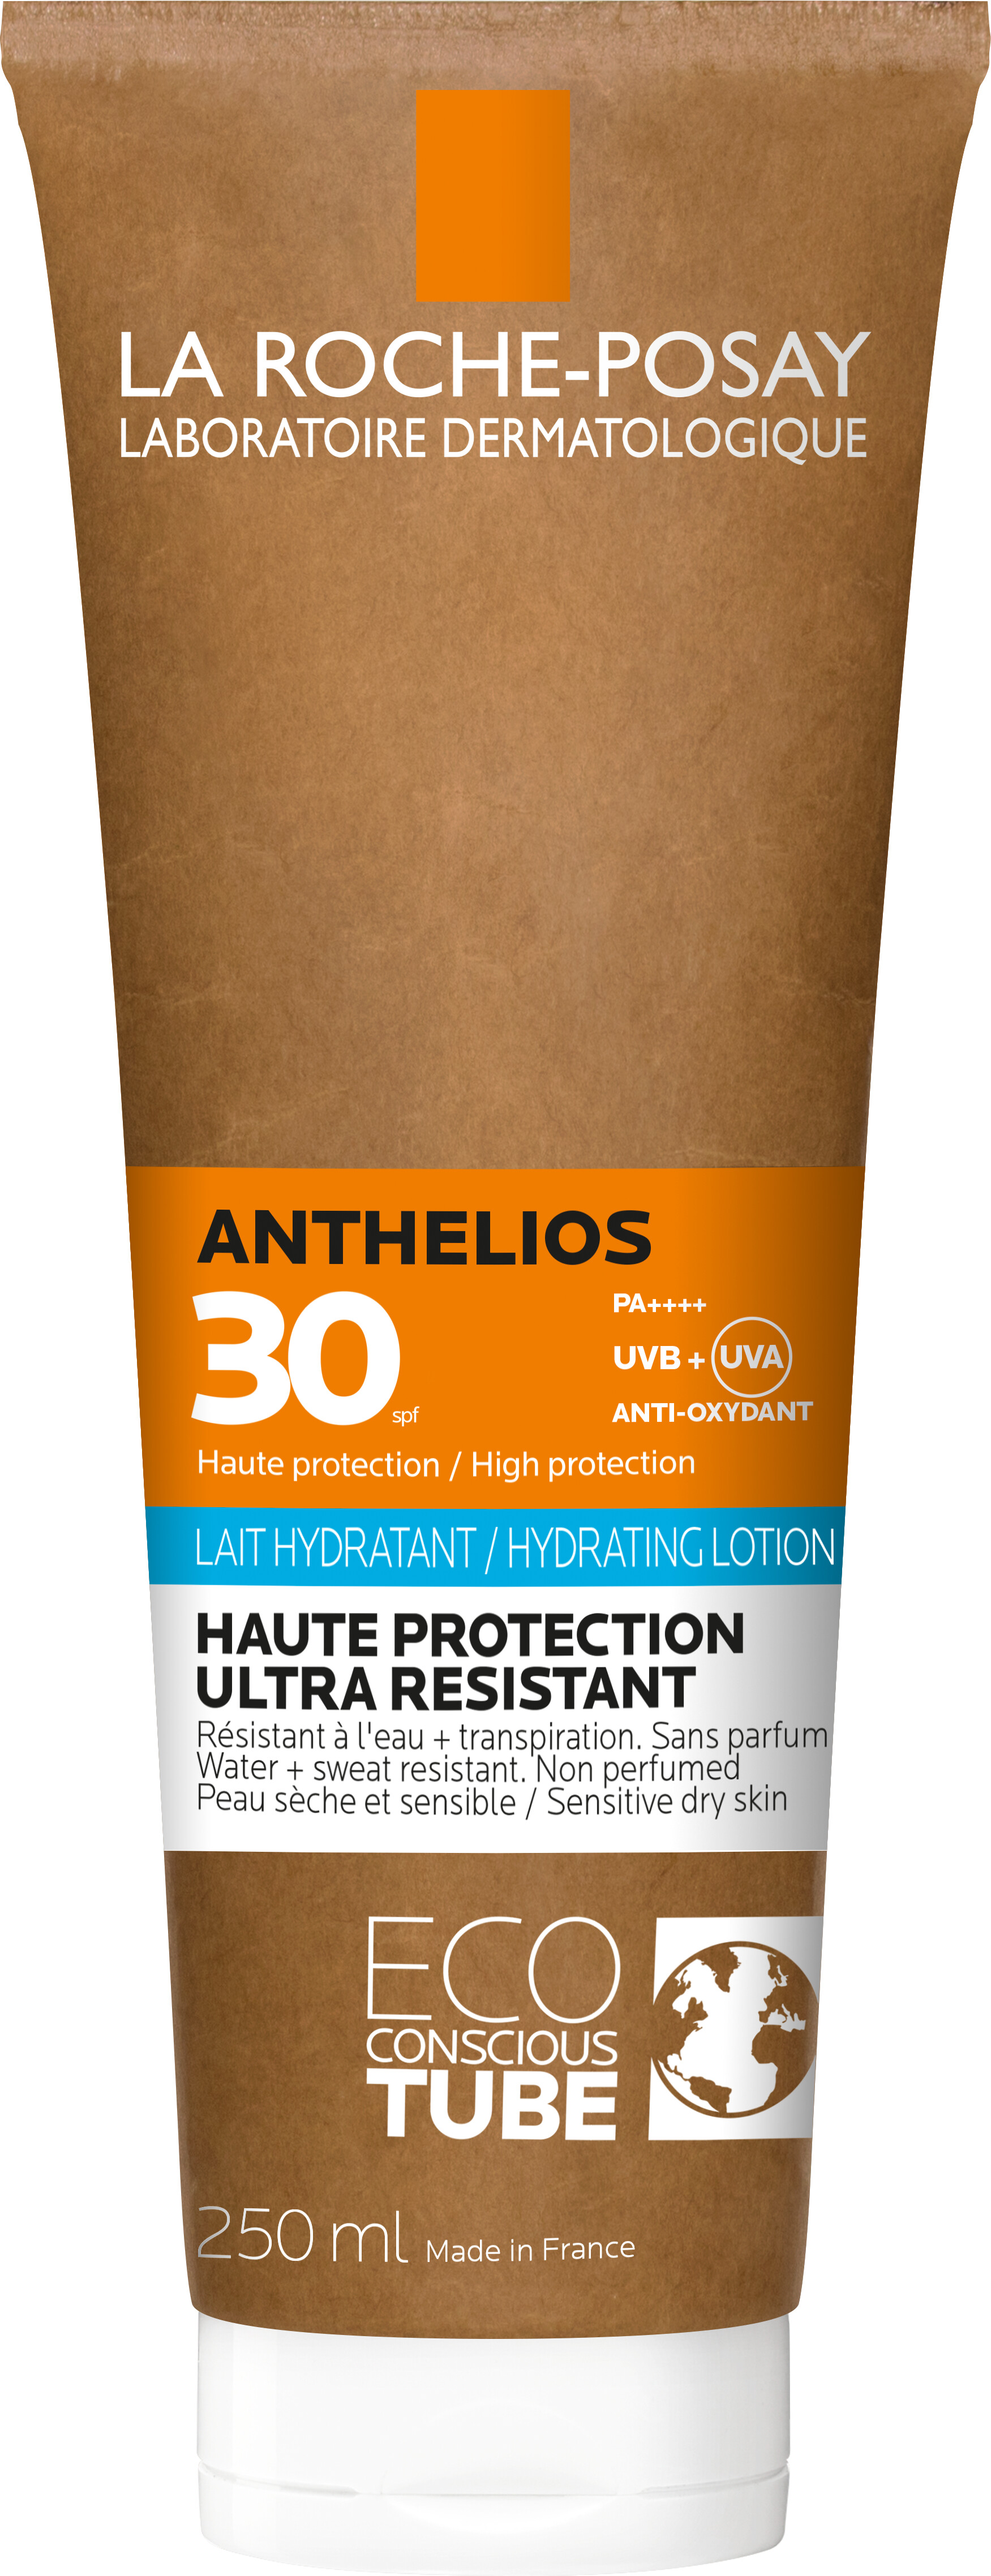 La Roche-Posay Anthelios Hydrating Lotion SPF30 250ml